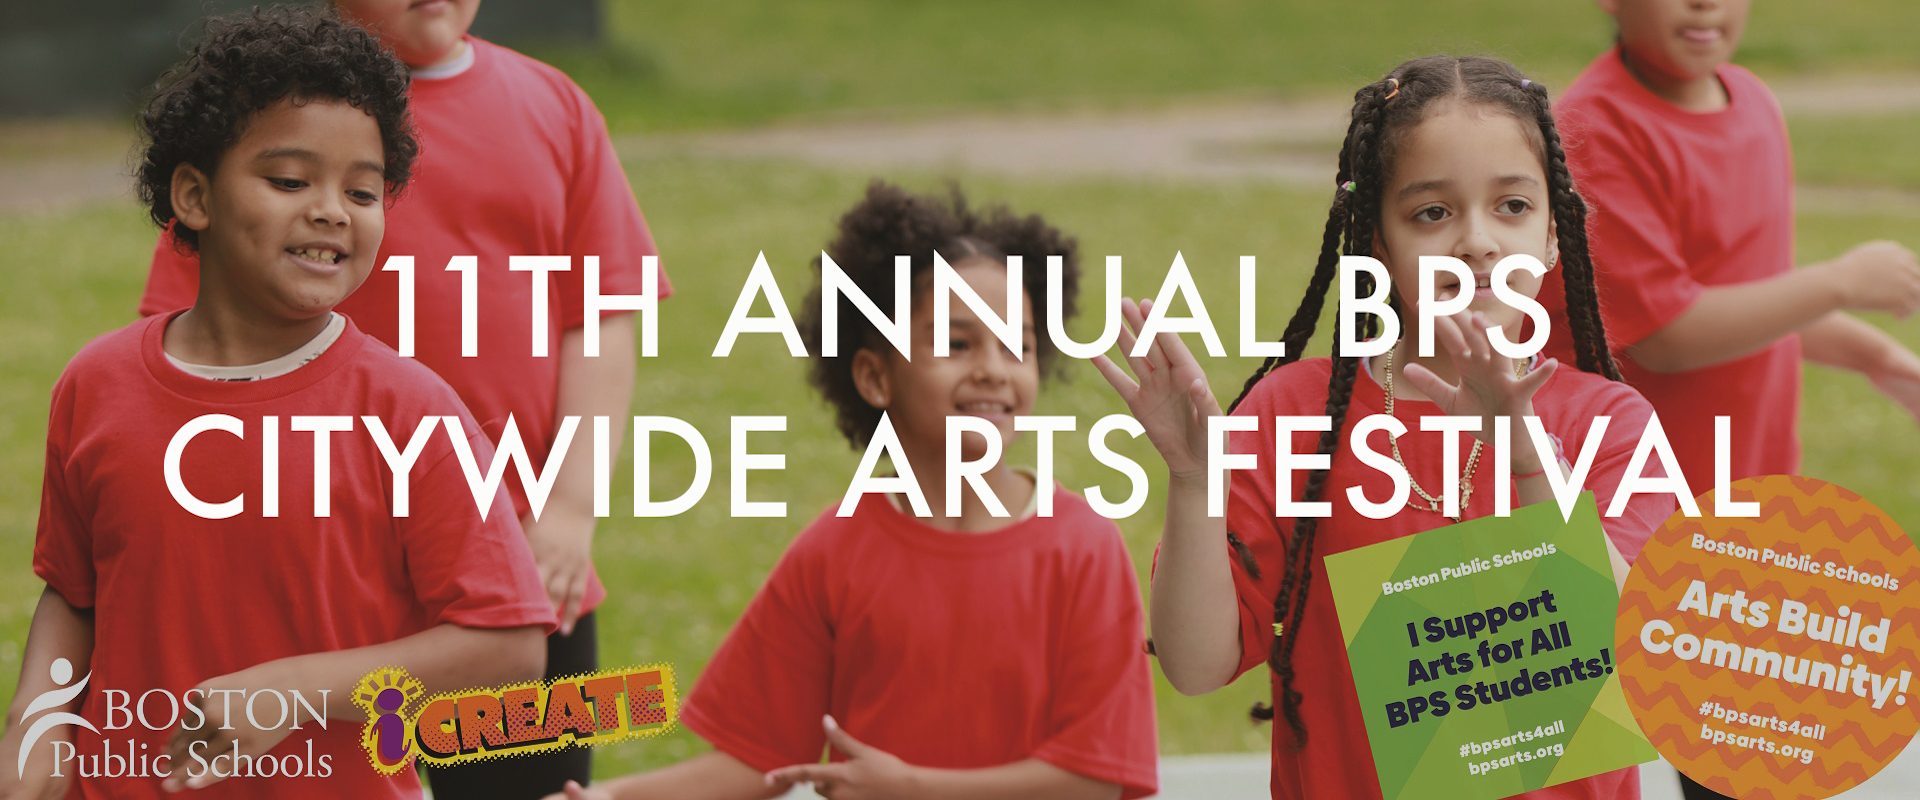 BPS Citywide Arts Festival